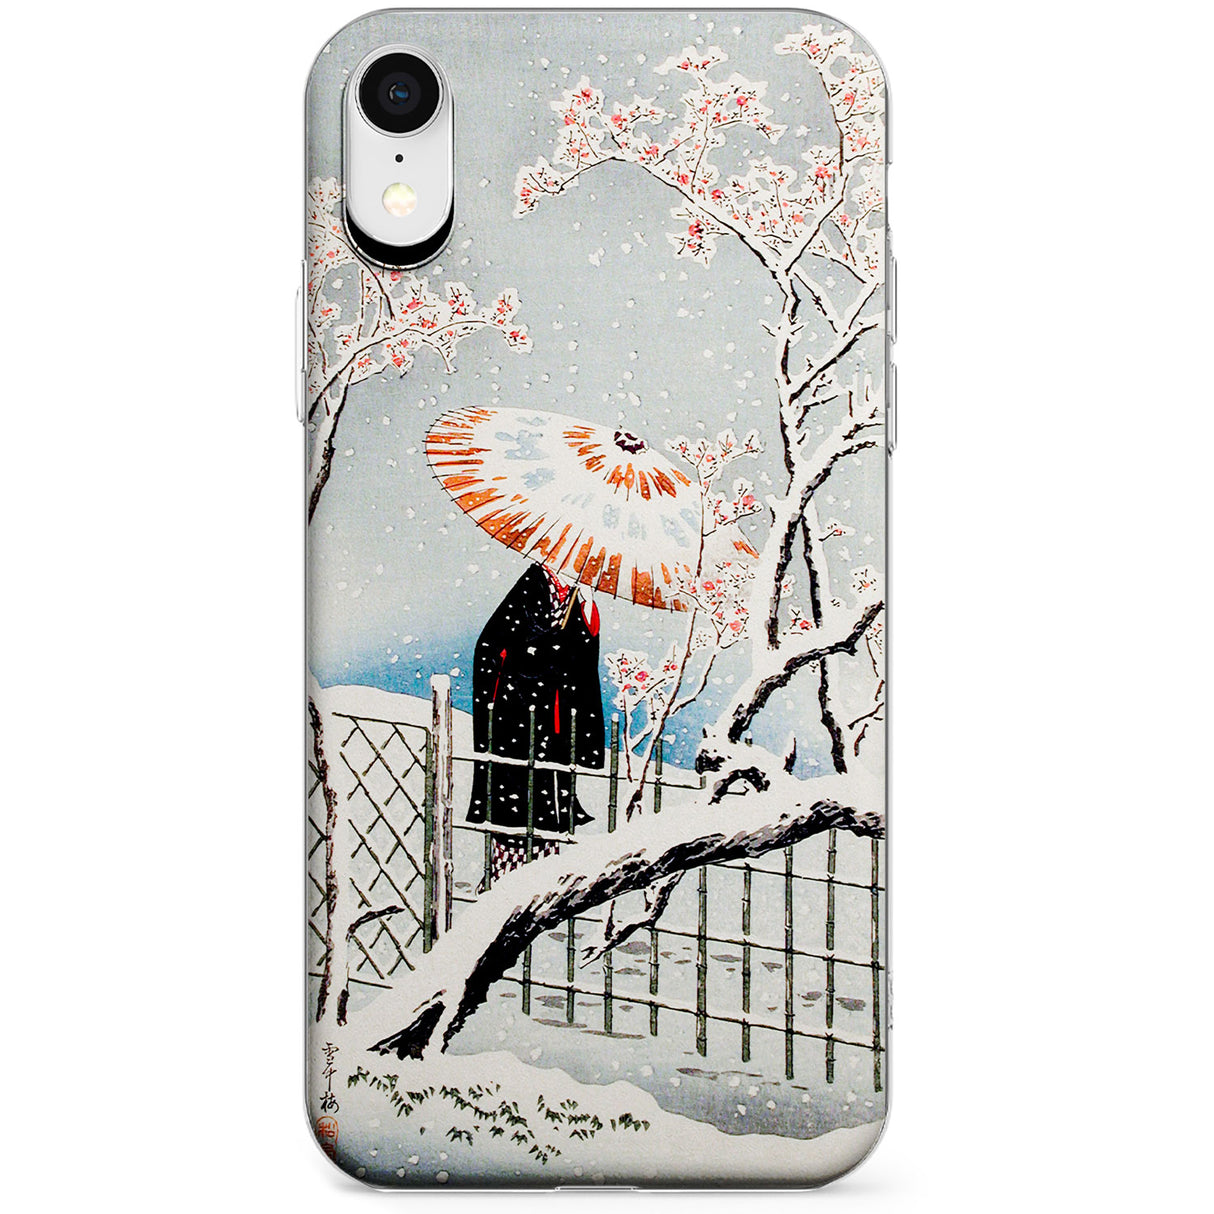 Plum Tree in Snow by Hiroaki Takahashi Phone Case for iPhone X, XS Max, XR